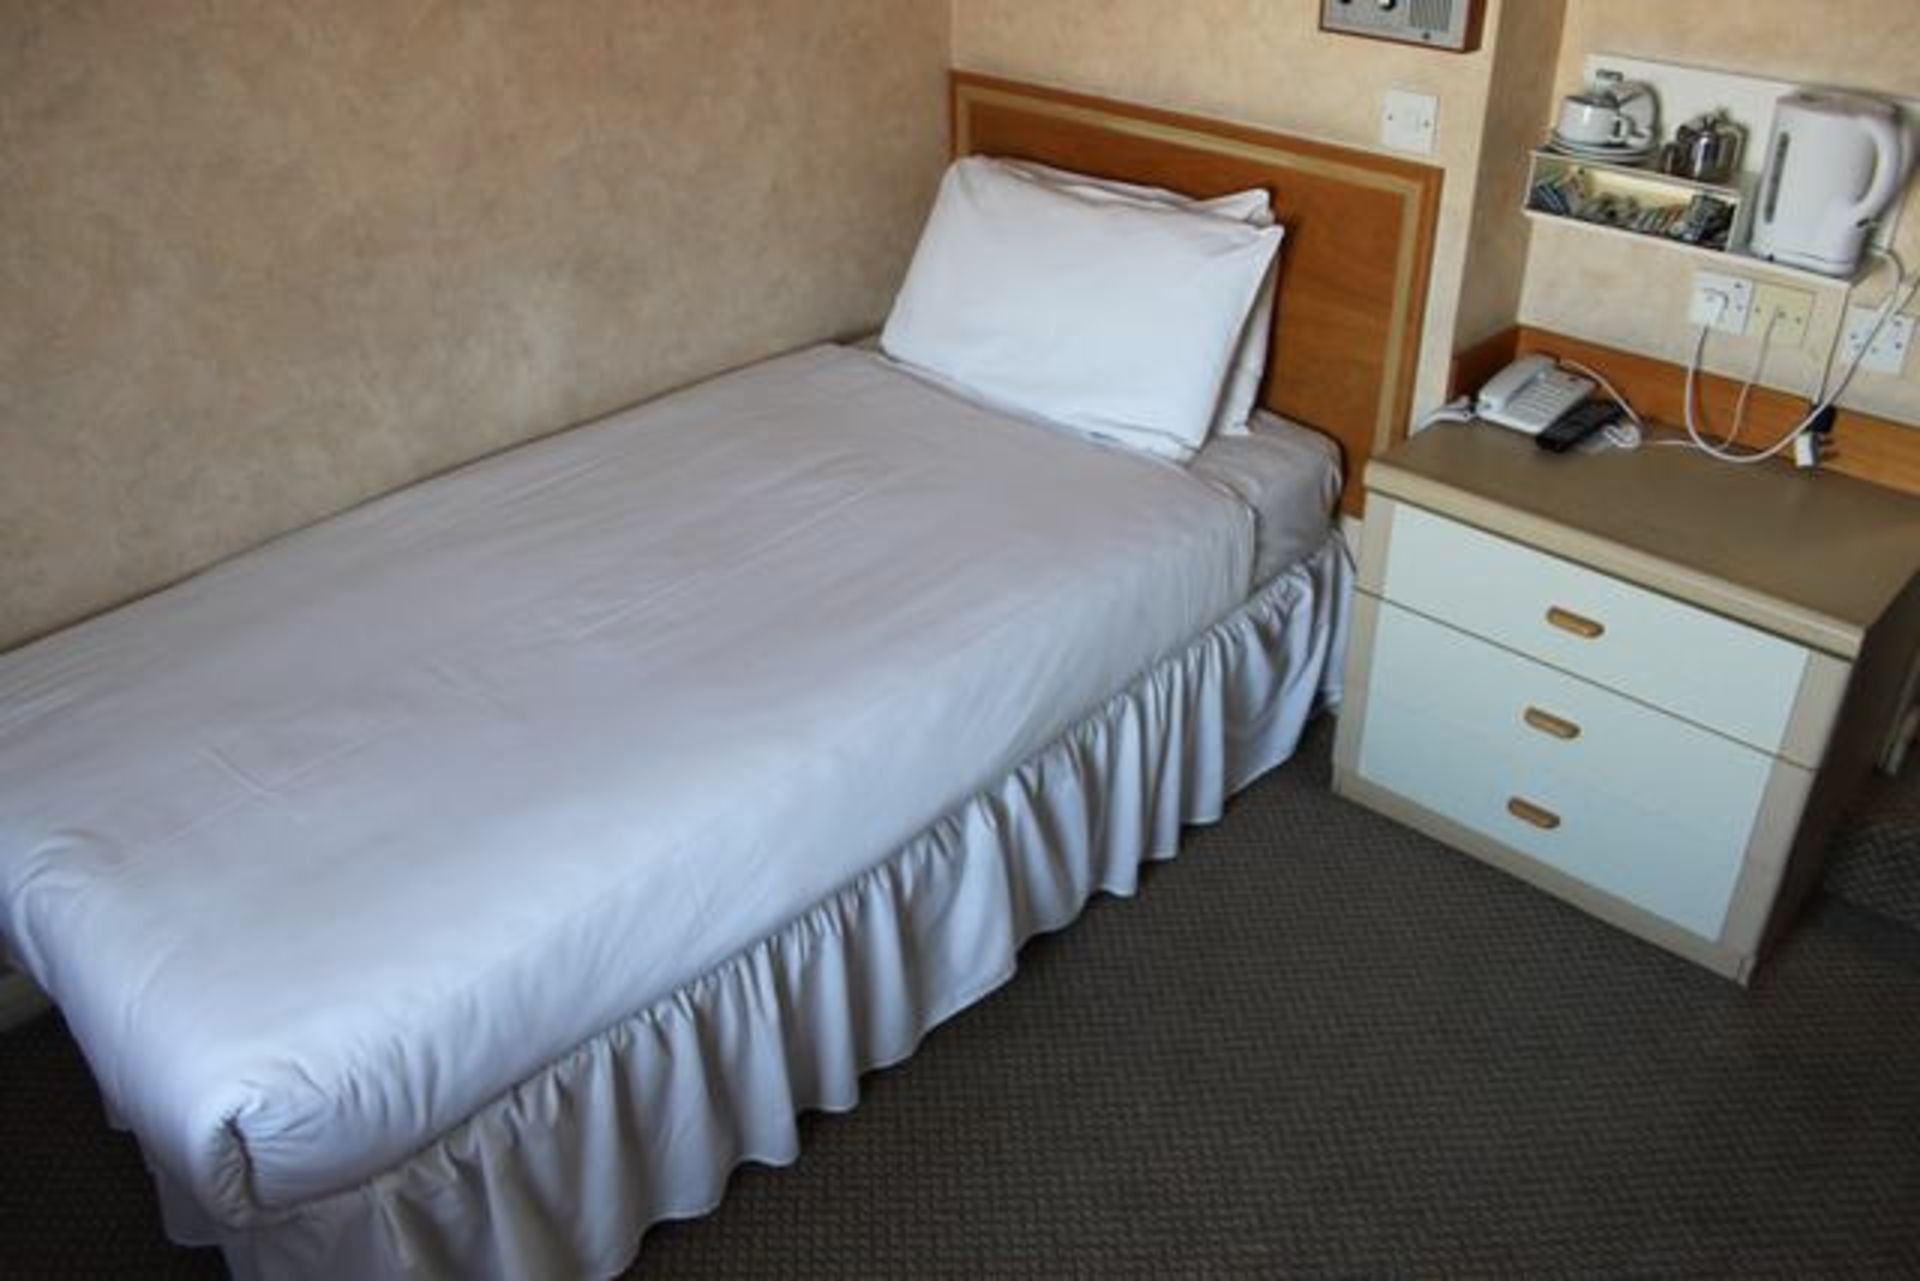 Room 101 comprising single bed, three drawer chest, circular occasional table, tub chair, desk,